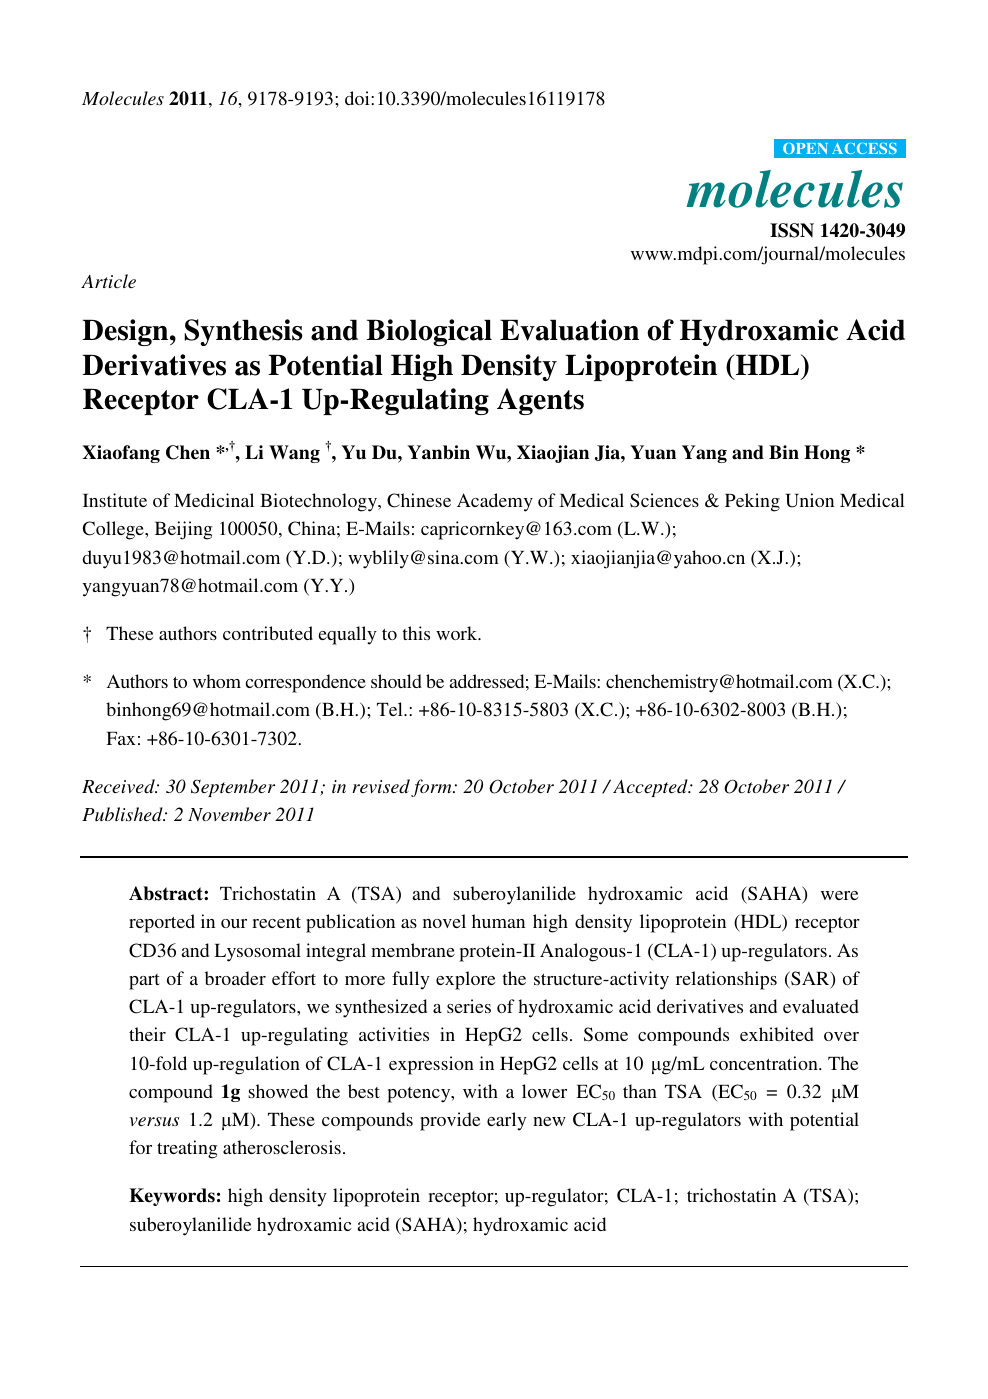 Design Synthesis And Biological Evaluation Of Hydroxamic Acid Derivatives As Potential High Density Lipoprotein Hdl Receptor Cla 1 Up Regulating Agents Topic Of Research Paper In Chemical Sciences Download Scholarly Article Pdf And